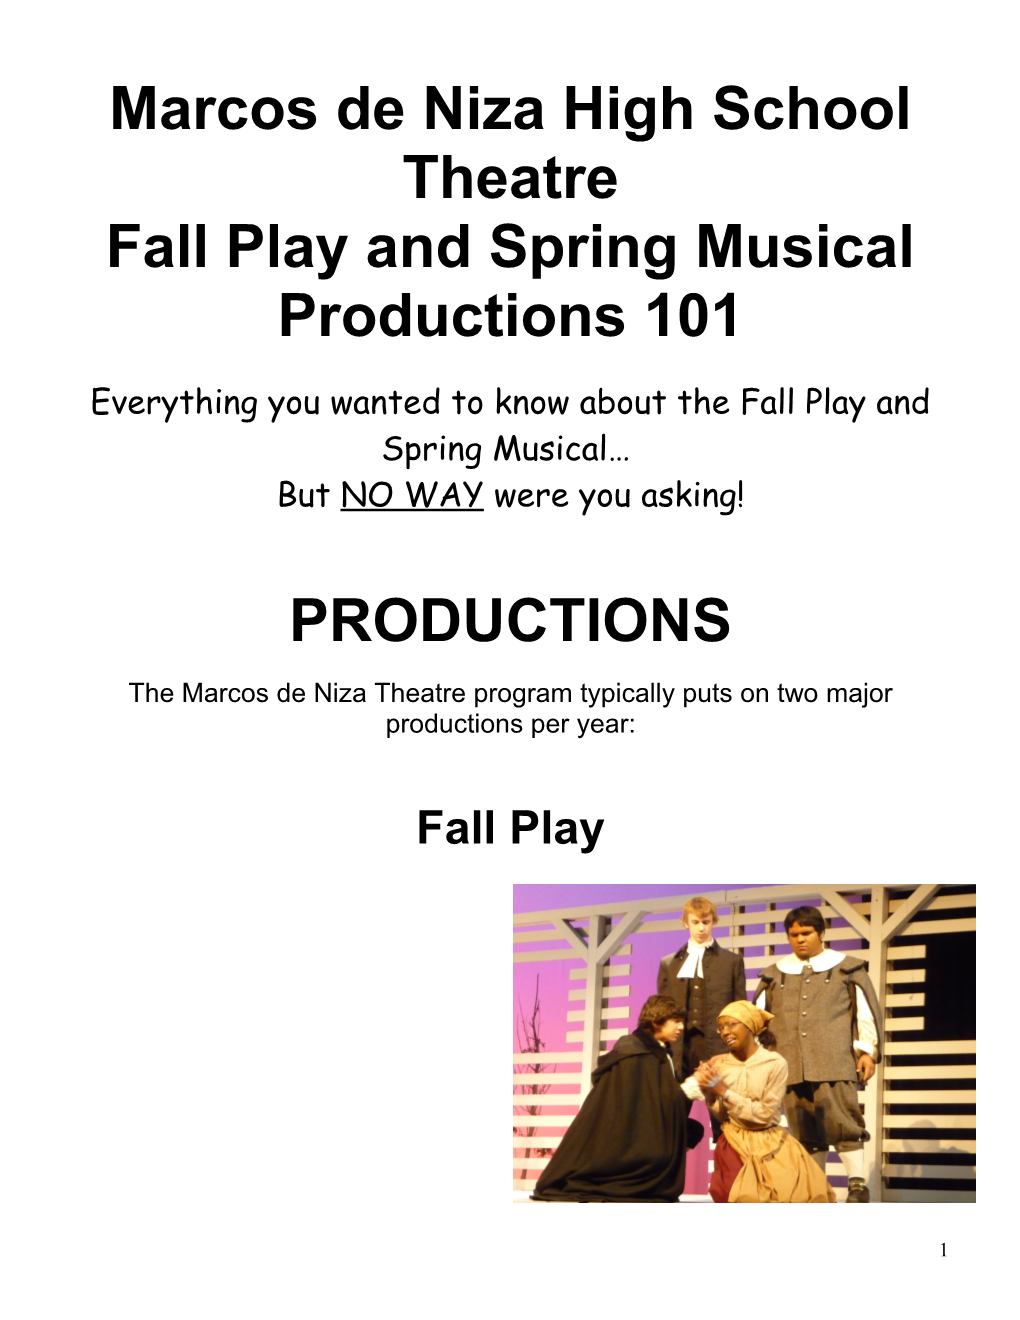 Fall Play and Spring Musical